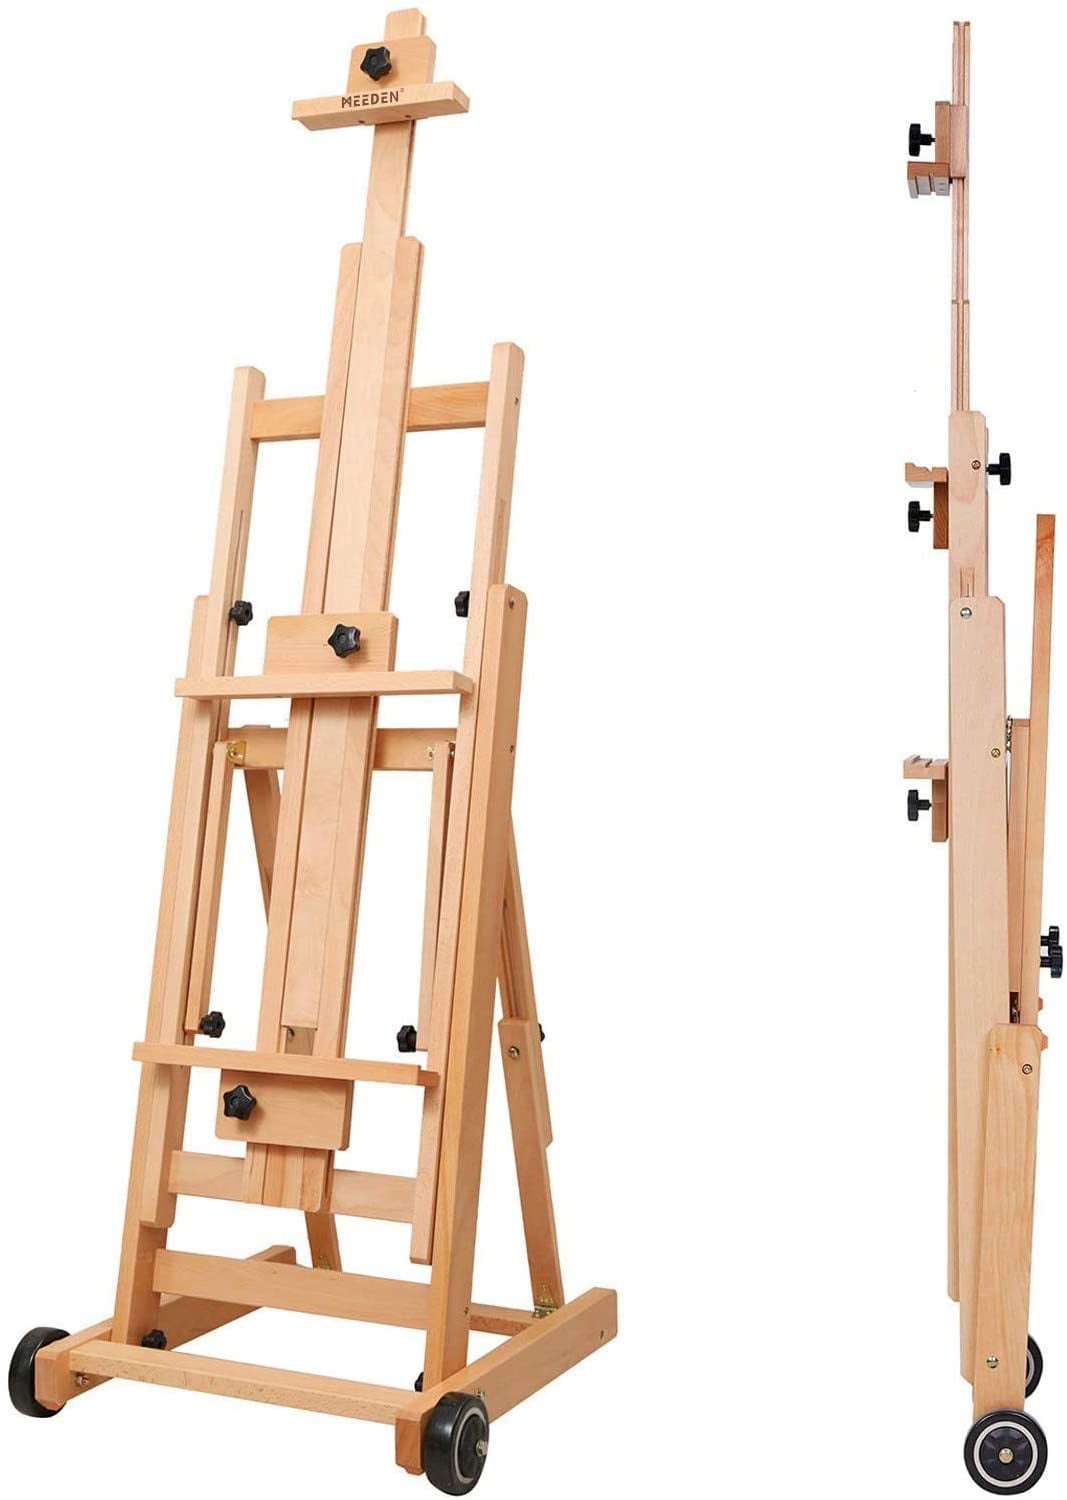 All Media Adjustable Beech Wood Studio Easel Painting Floor Easel Stand MEEDEN Versatile Studio H-Frame Easel Holds Canvas Art up to 77 Movable and Tilting Flat Available 